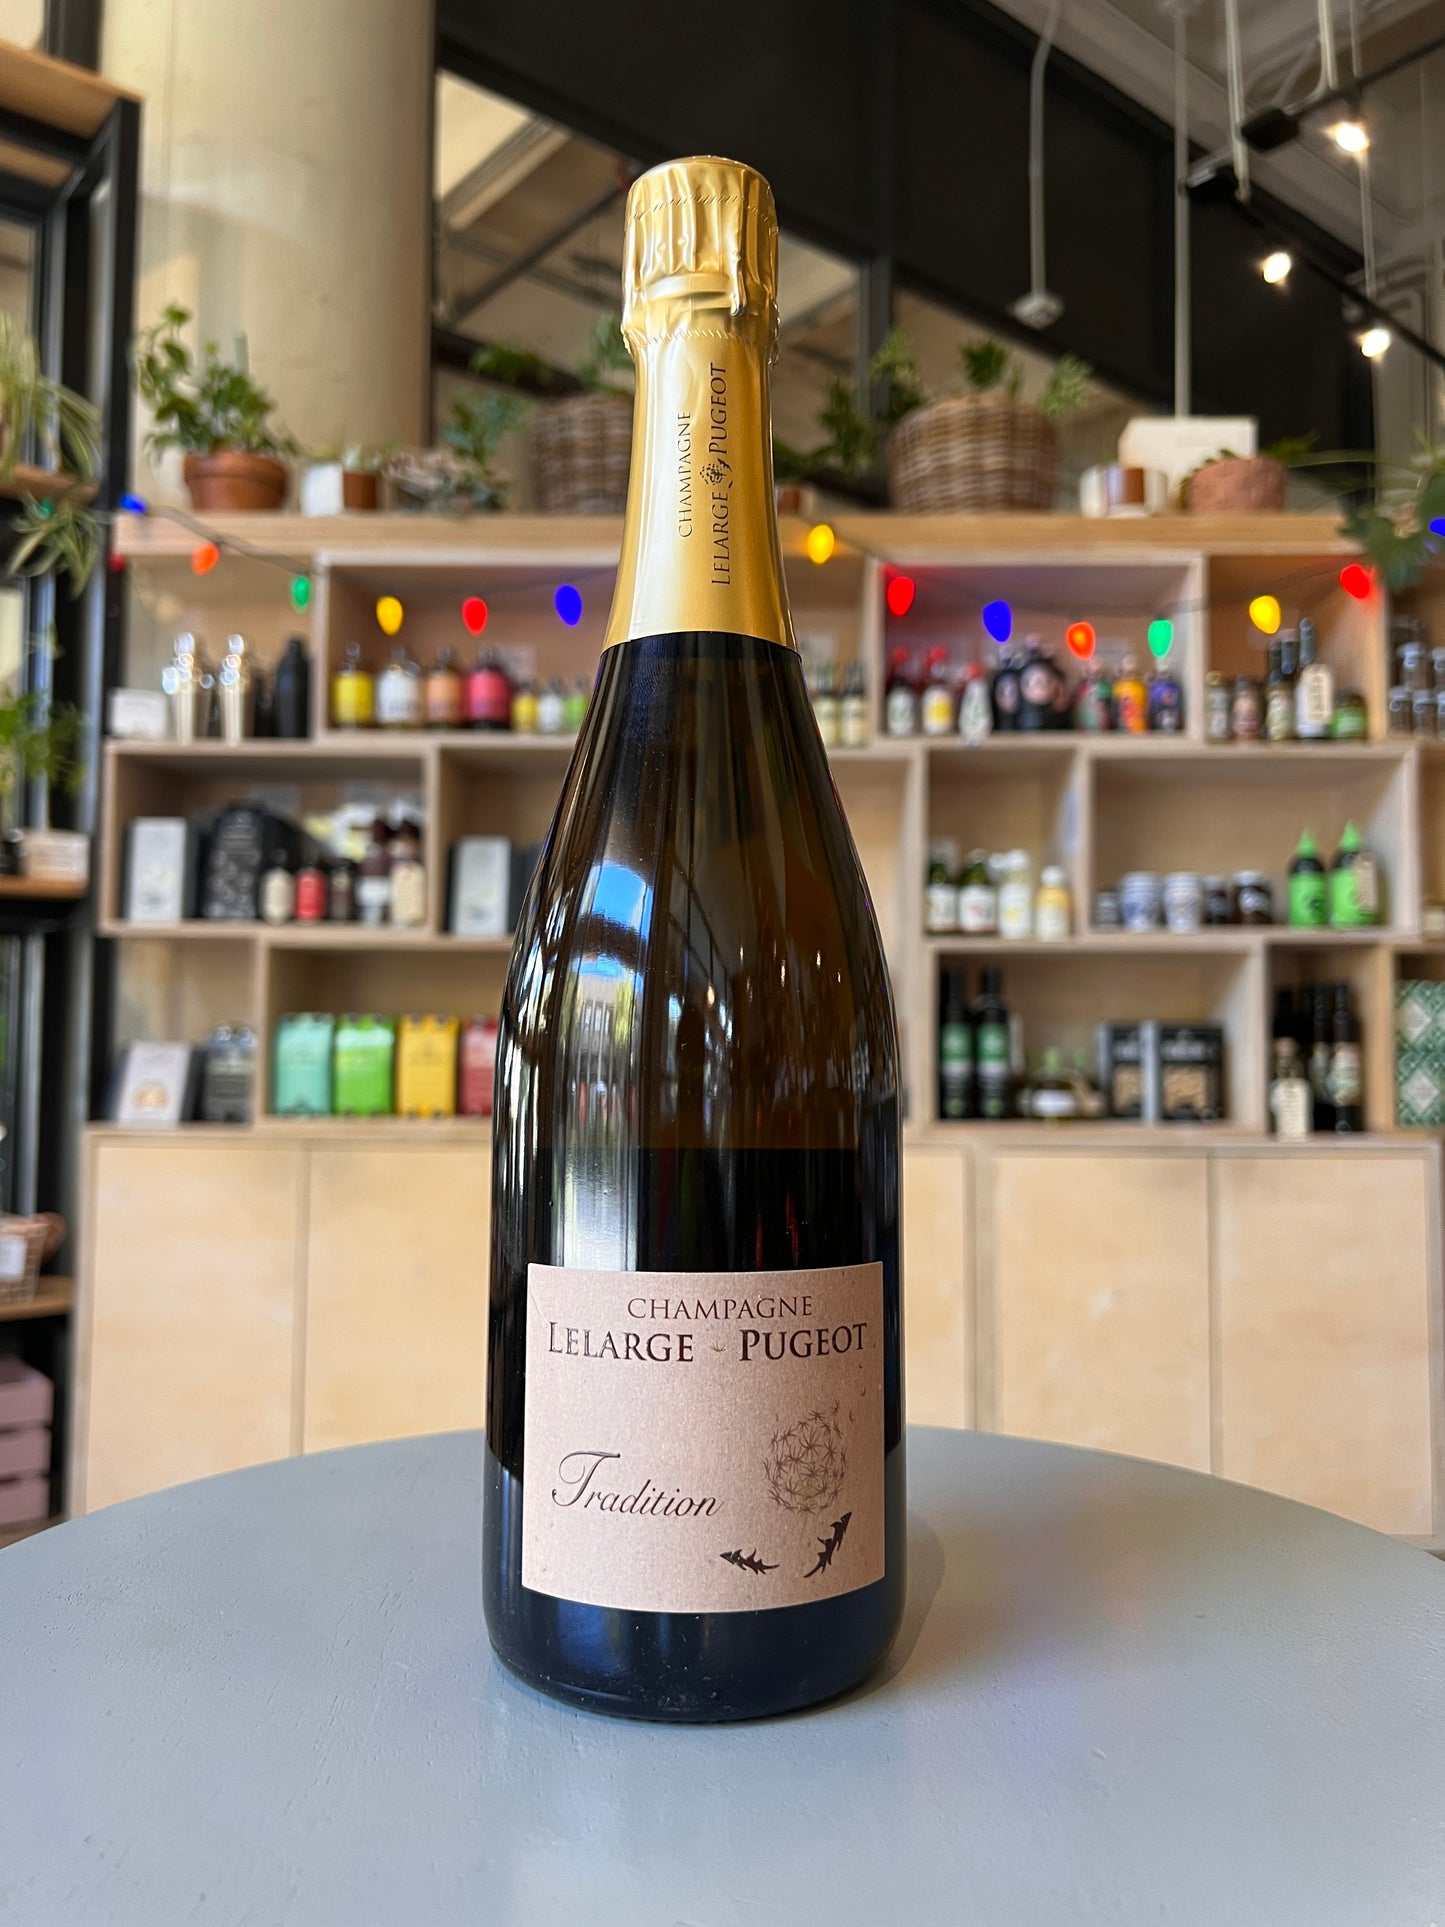 Lelarge-Pugeot Champagne Tradition